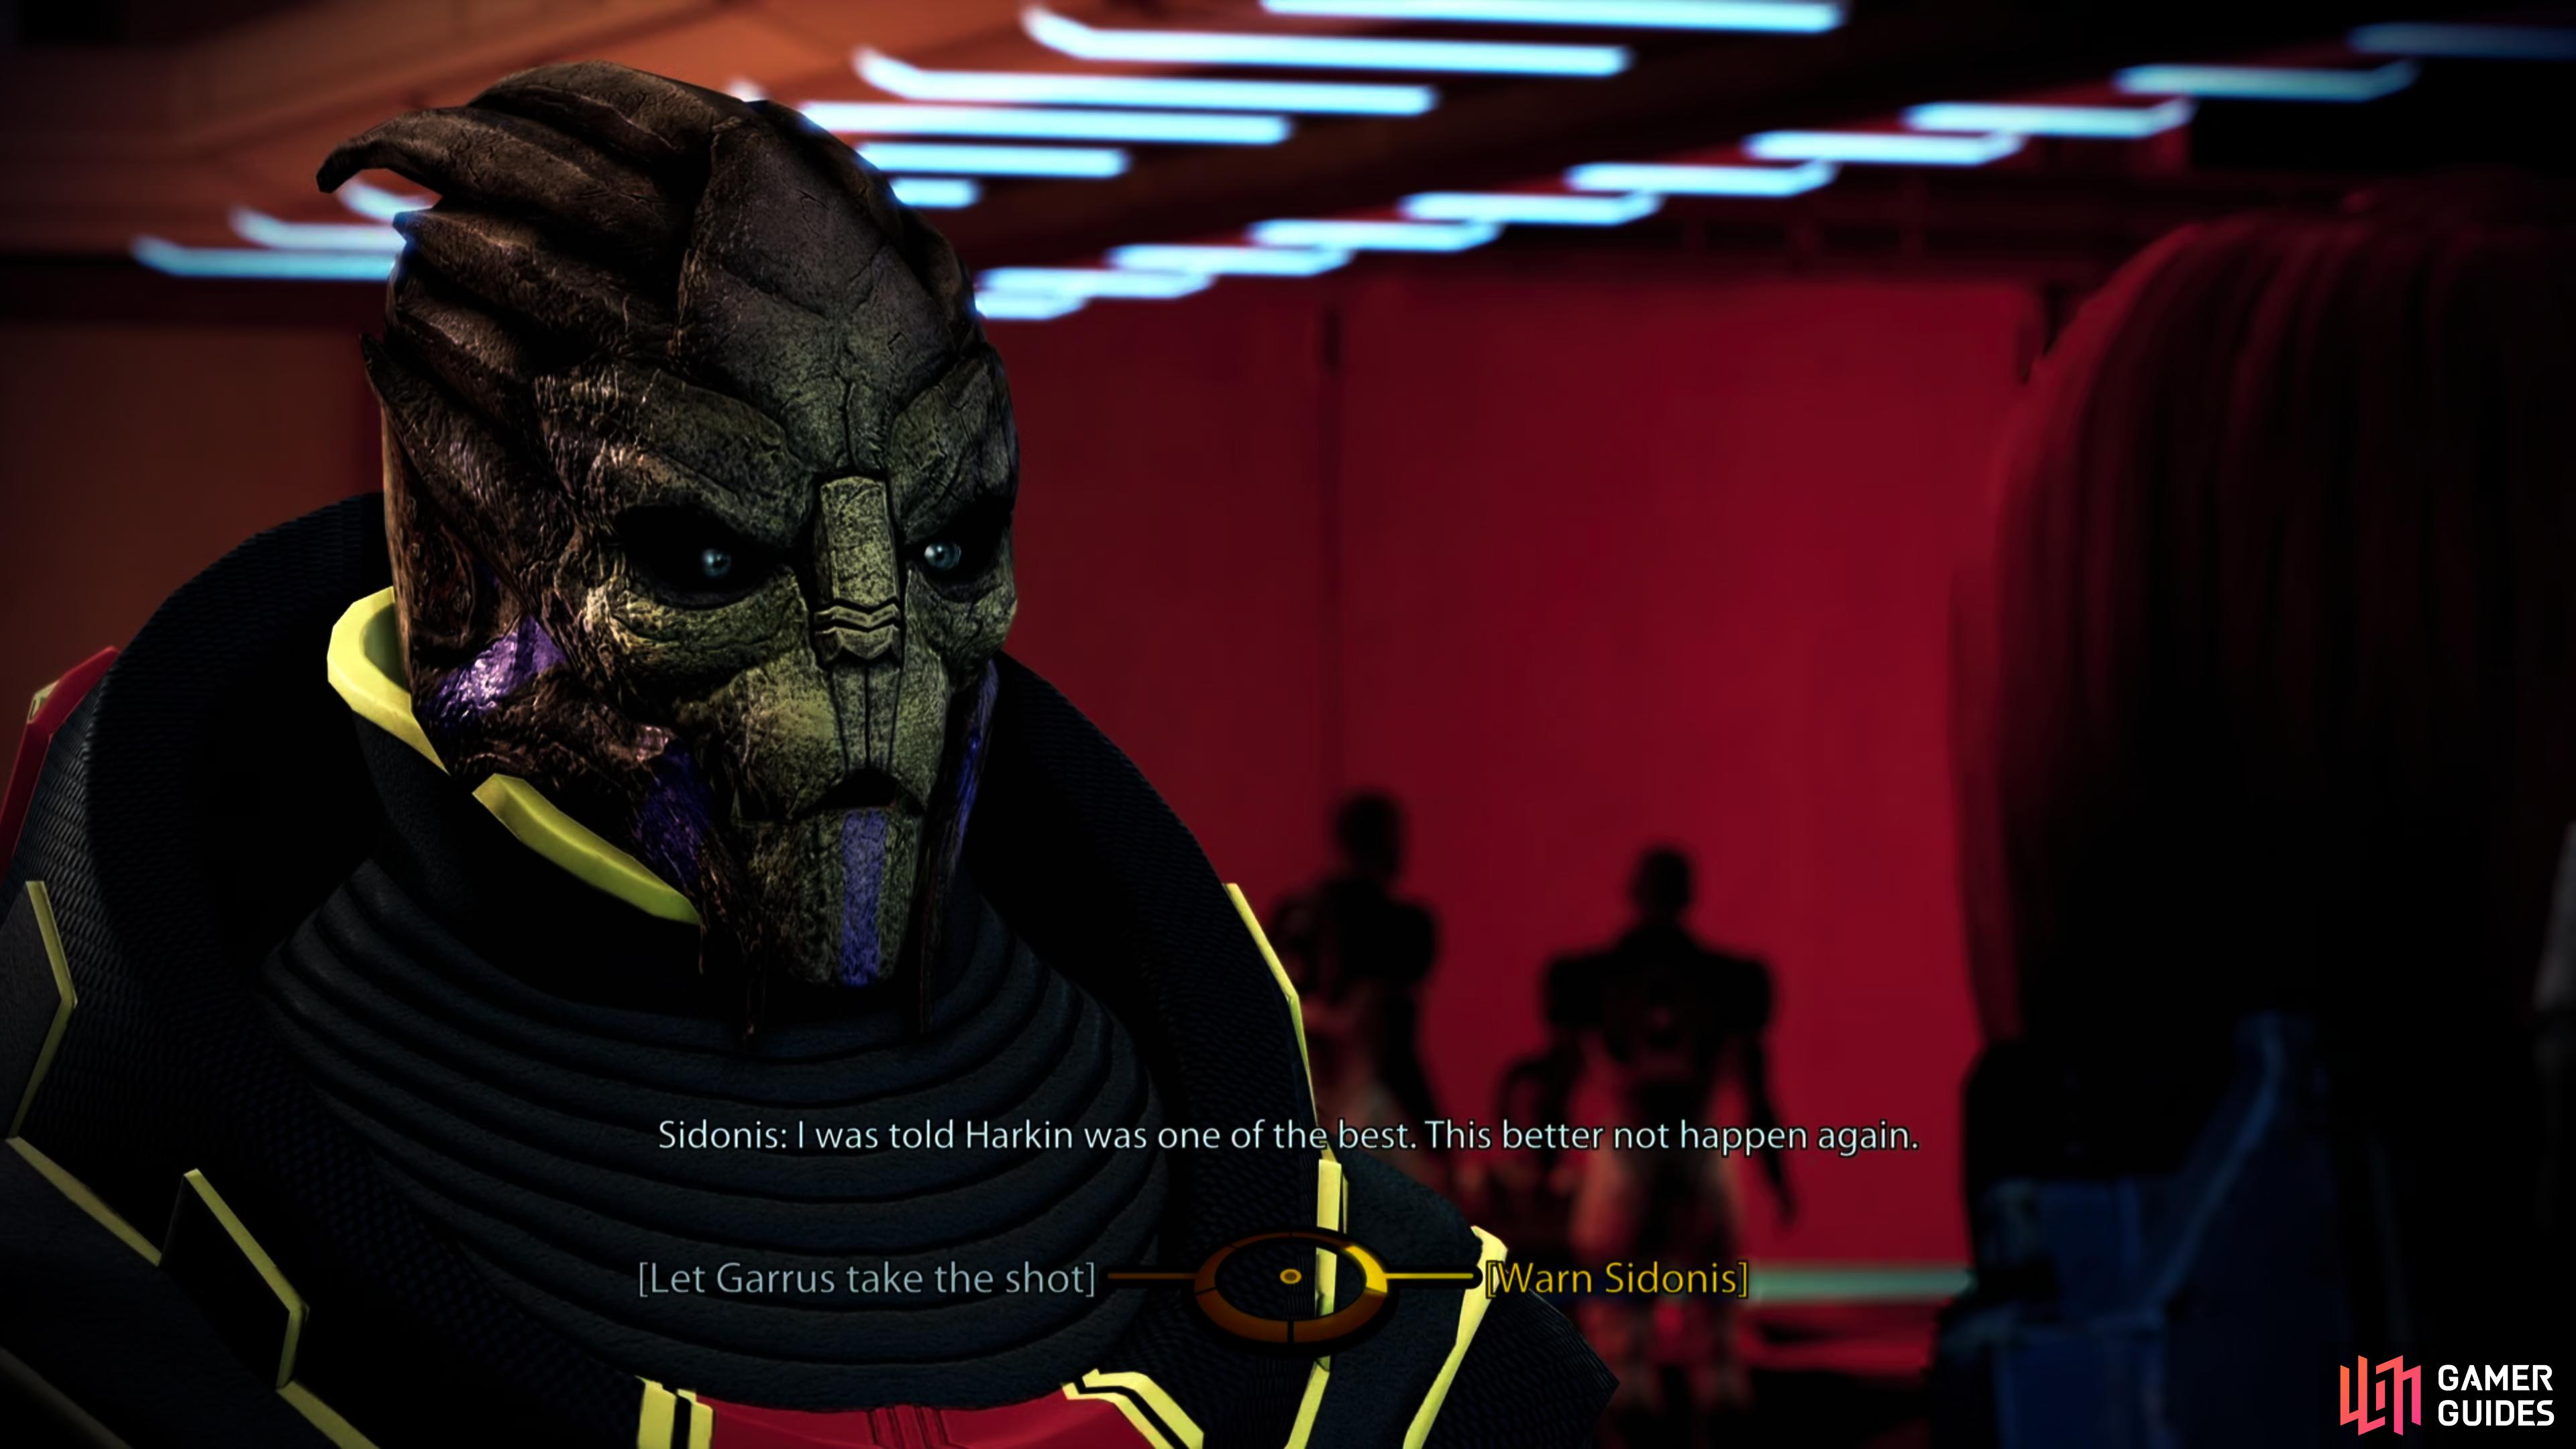 Later you can help Garrus take out Sidonis, or help Sidonis escape.